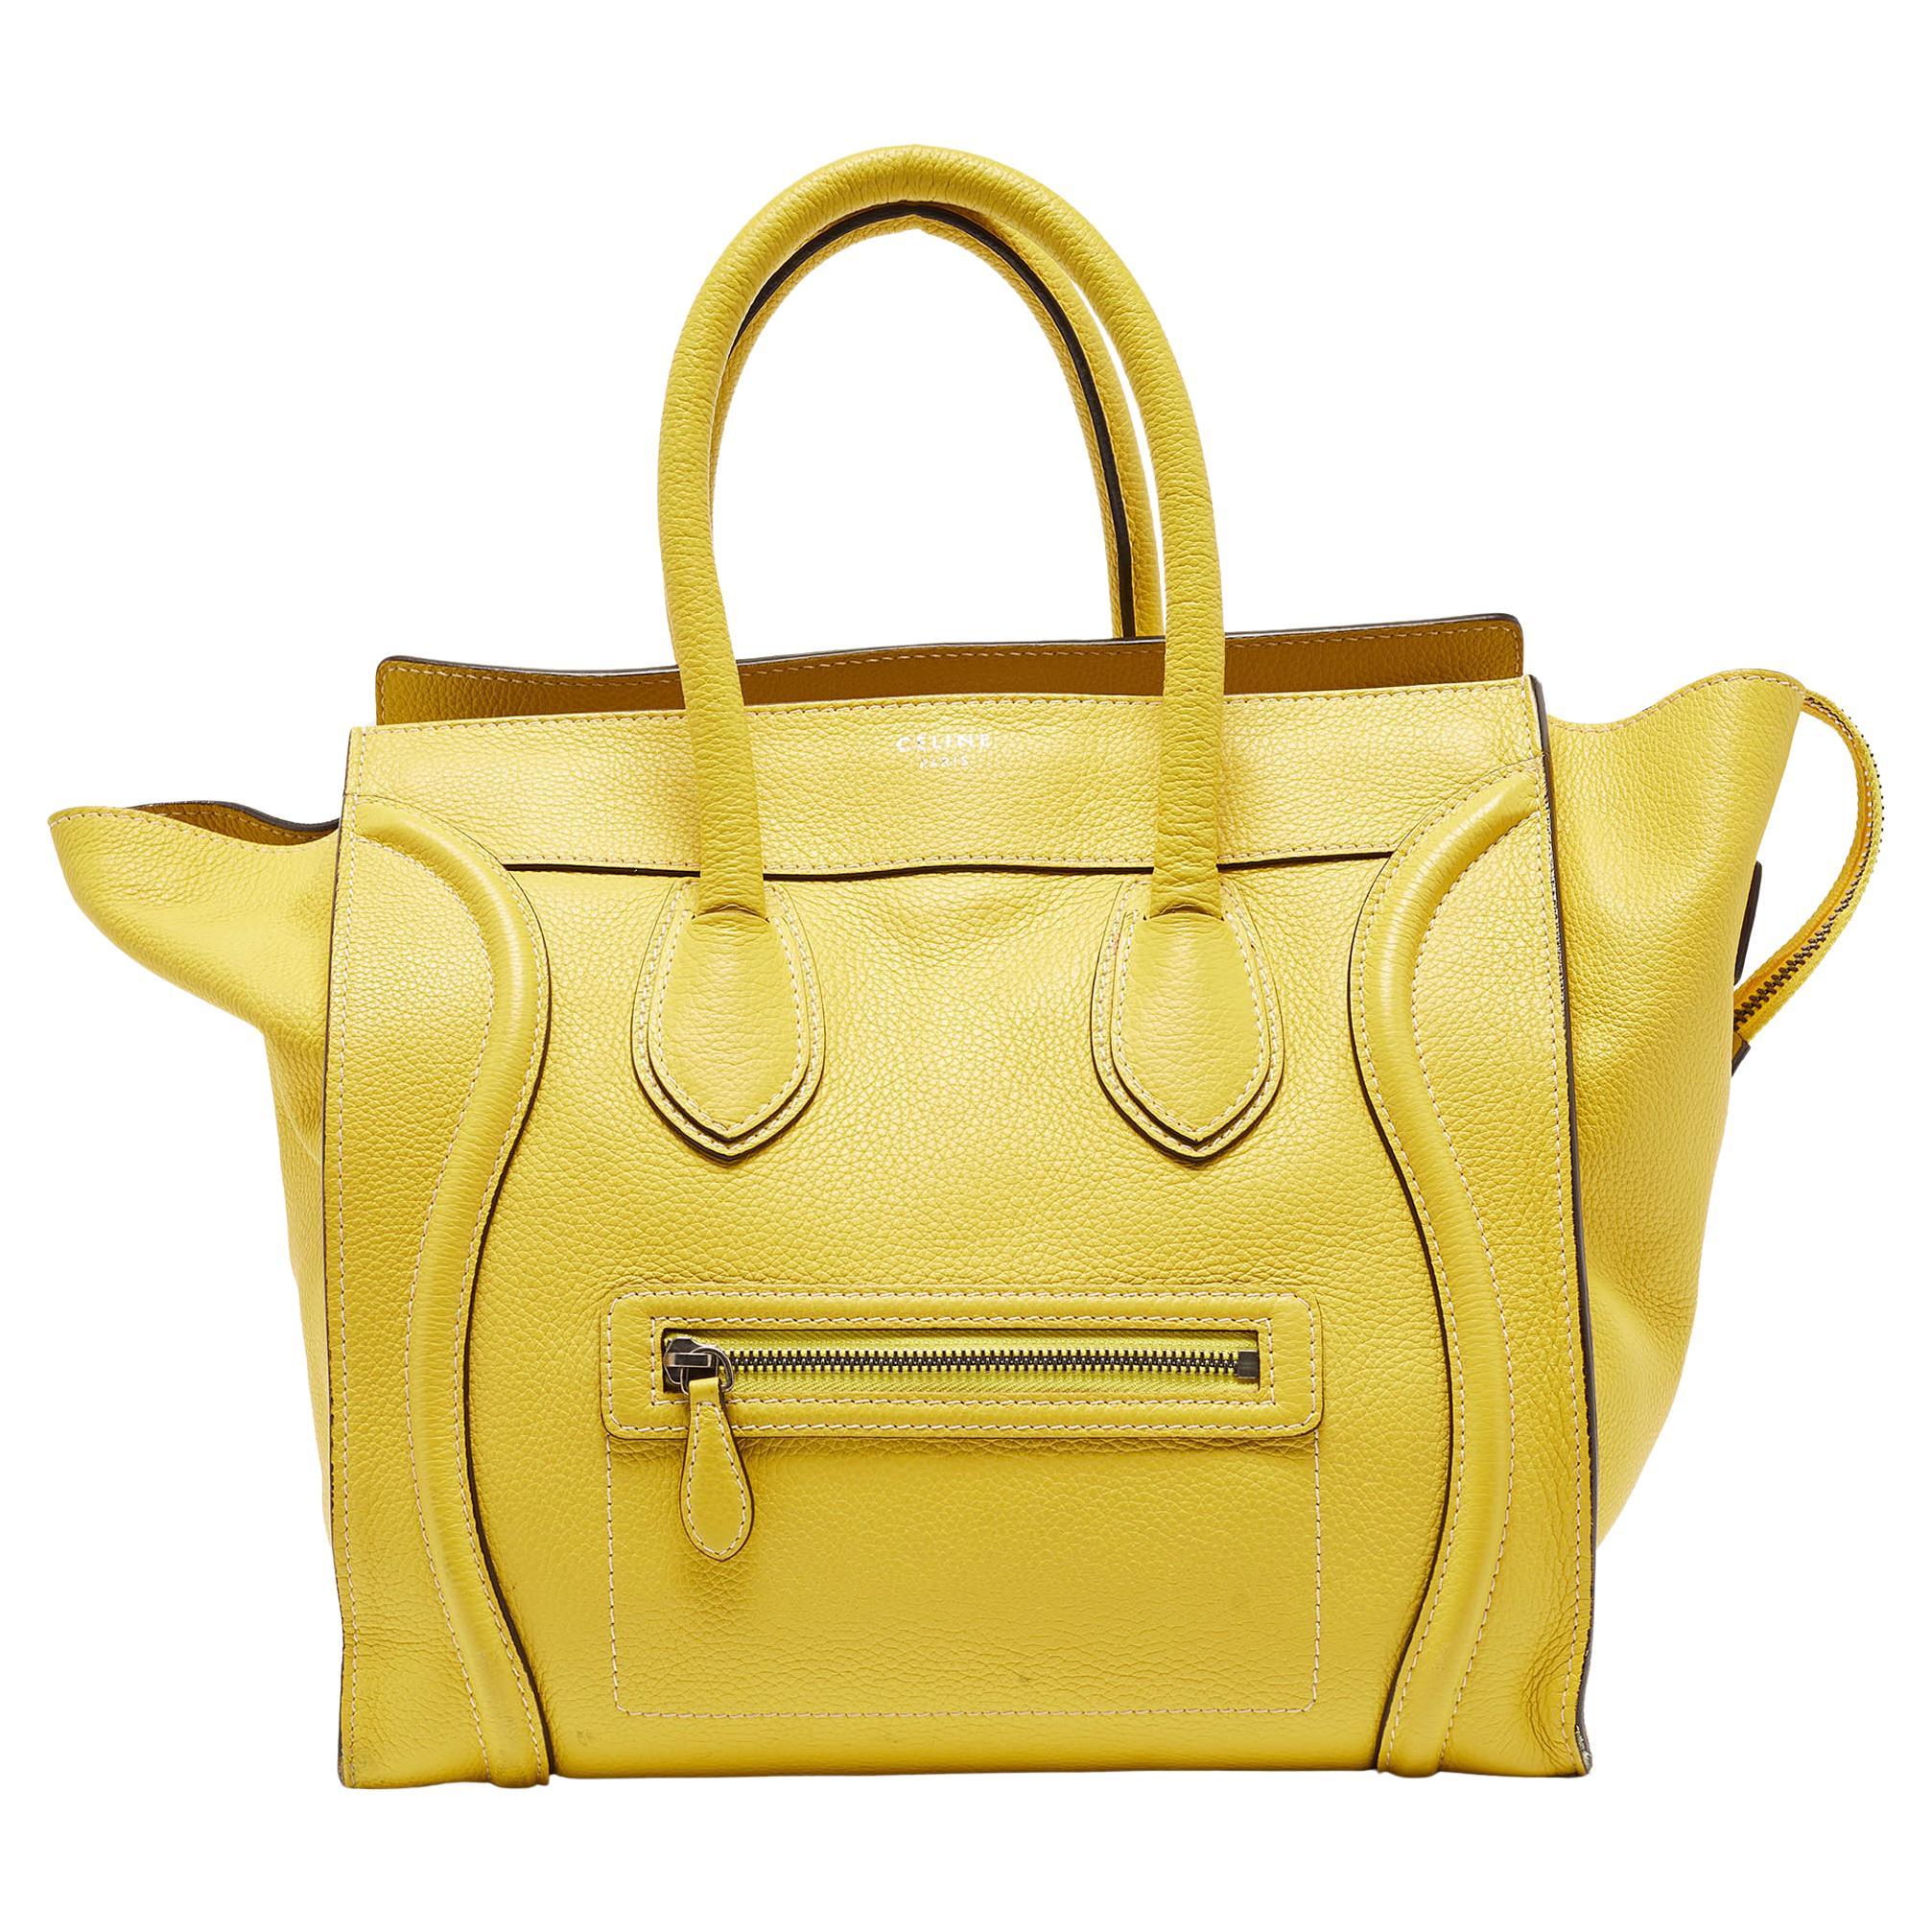 Celine Yellow Leather Mini Luggage Tote For Sale